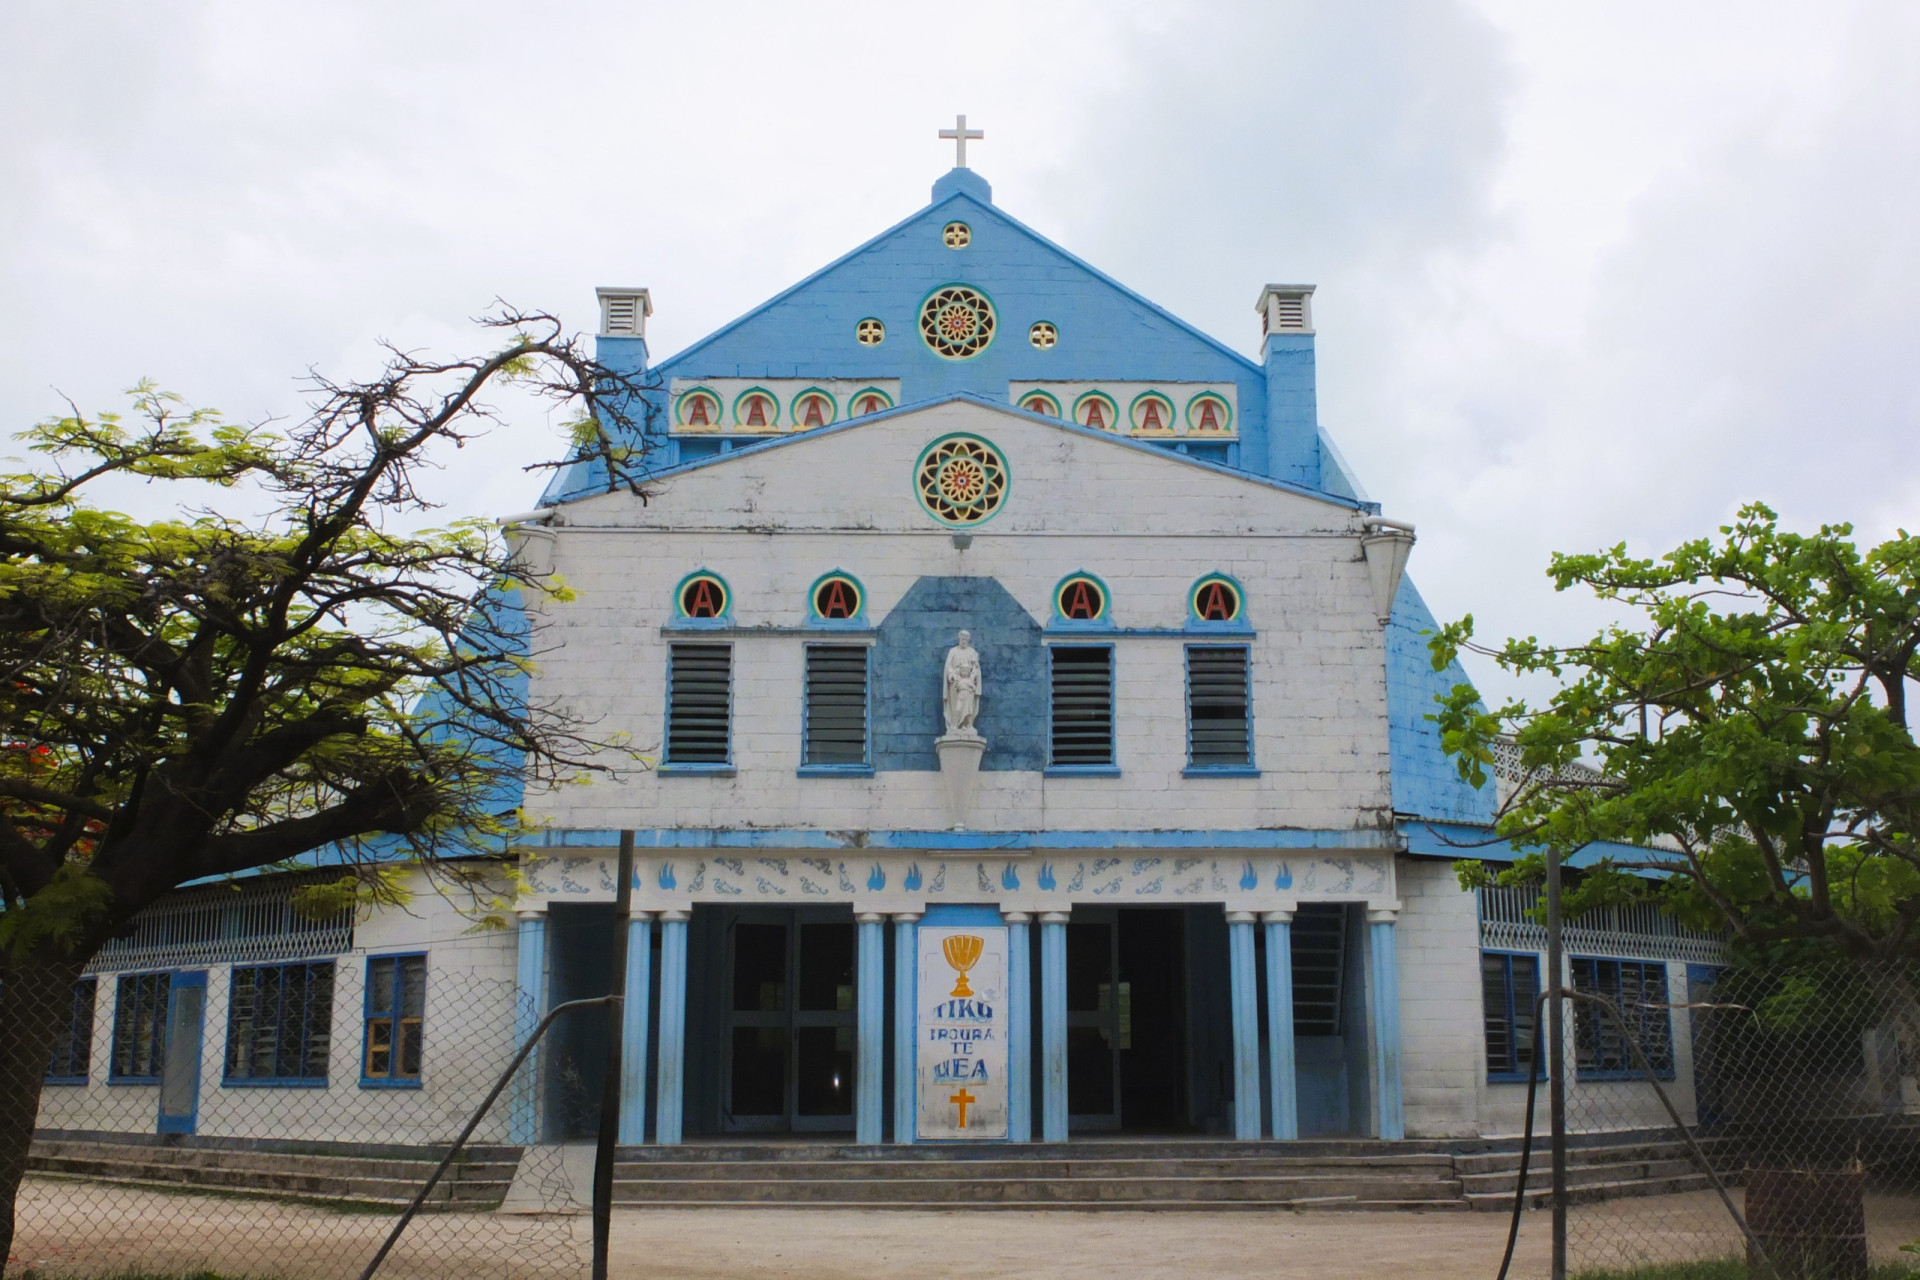 <p>Christianity is the predominant religion of the nation, with the largest denominations being made up of the Roman Catholic Church and the Kiribati Uniting Church. But despite these religious positions, traditional beliefs also influence cultural practices.</p><p><a href="https://www.msn.com/en-us/community/channel/vid-7xx8mnucu55yw63we9va2gwr7uihbxwc68fxqp25x6tg4ftibpra?cvid=94631541bc0f4f89bfd59158d696ad7e">Follow us and access great exclusive content every day</a></p>